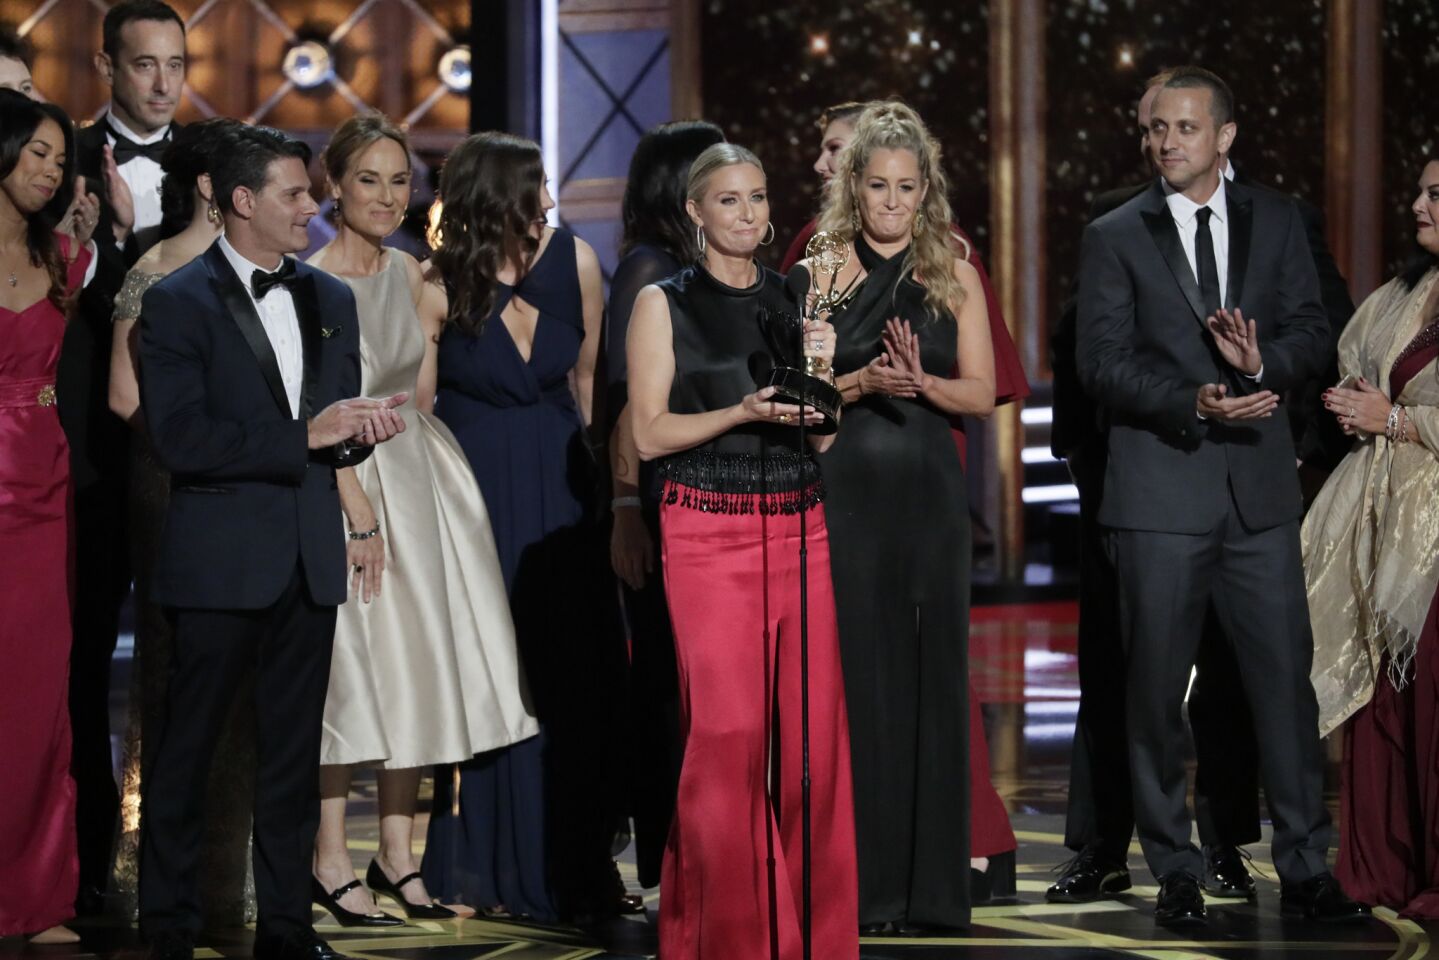 The cast and crew of "The Voice" wins the Emmy for reality competition program.